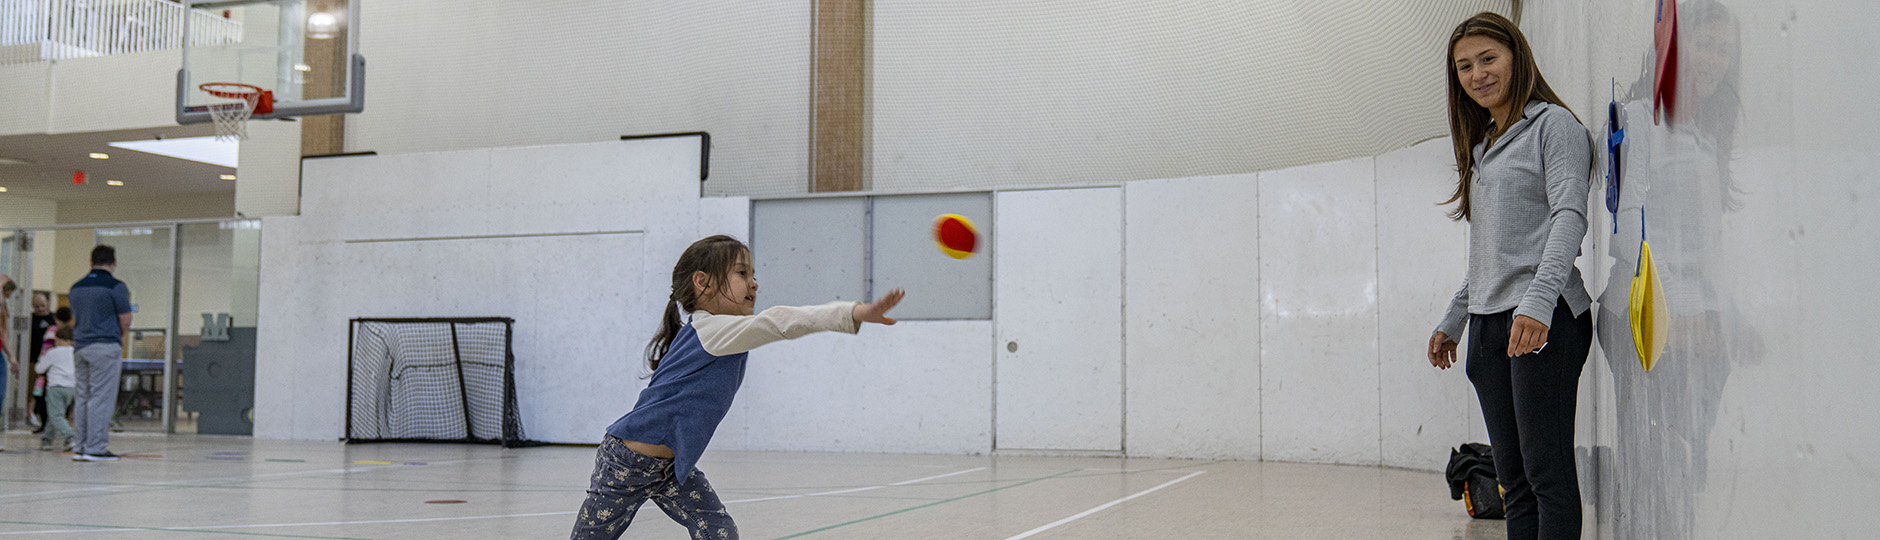 A photo of a young girl working with a University of Maine student on throwing a ball in a gym.